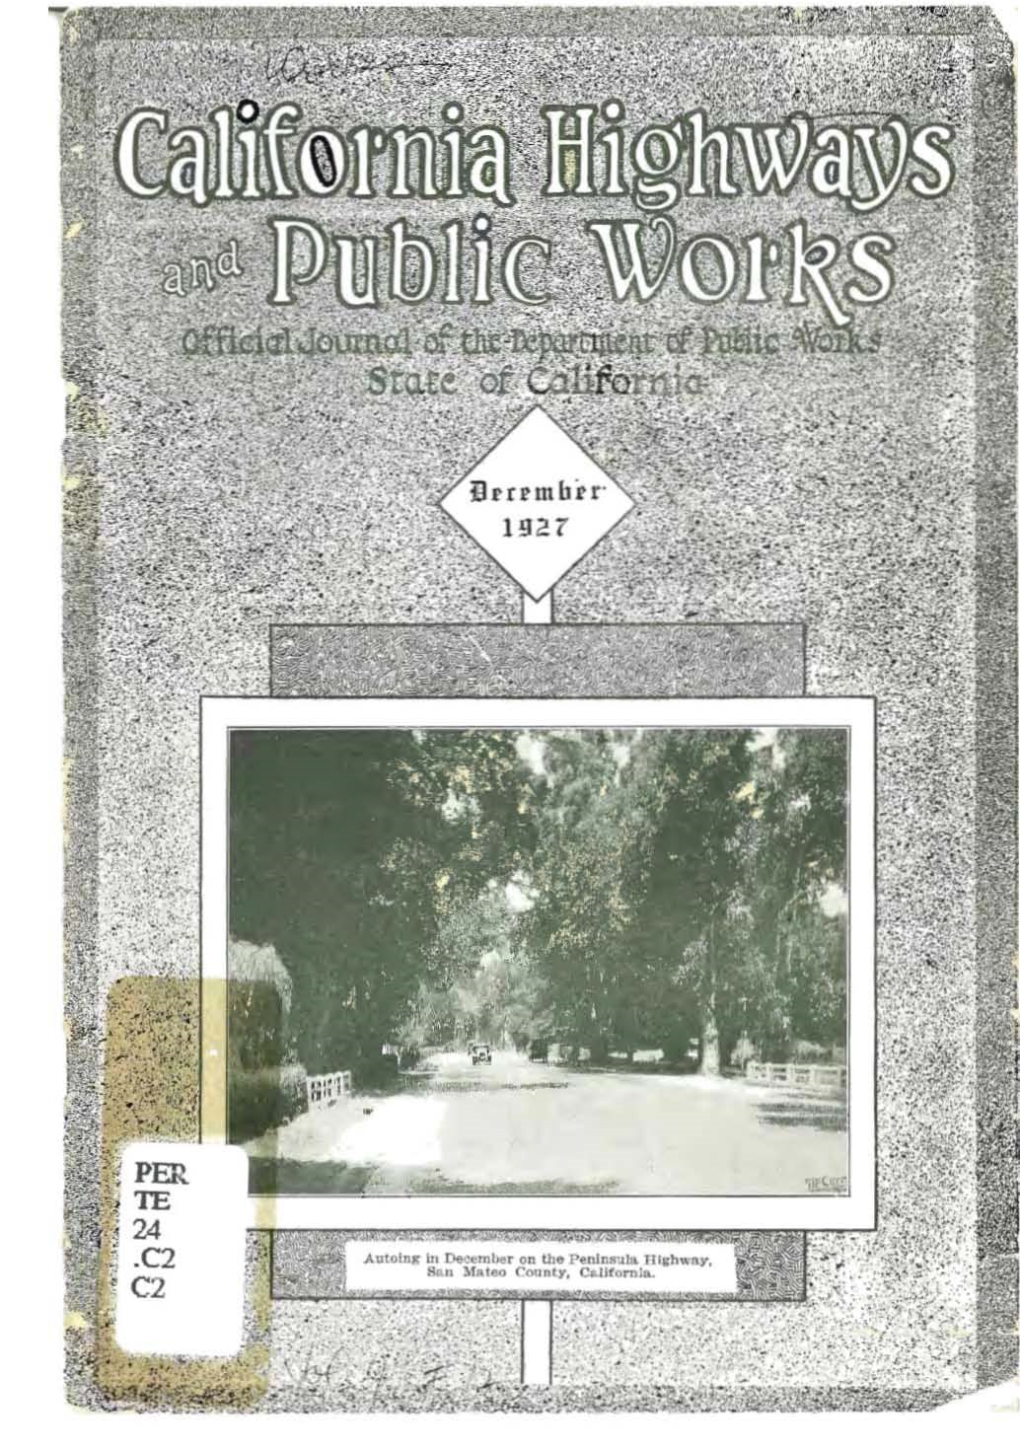 California Highways and Public Works, November 1927